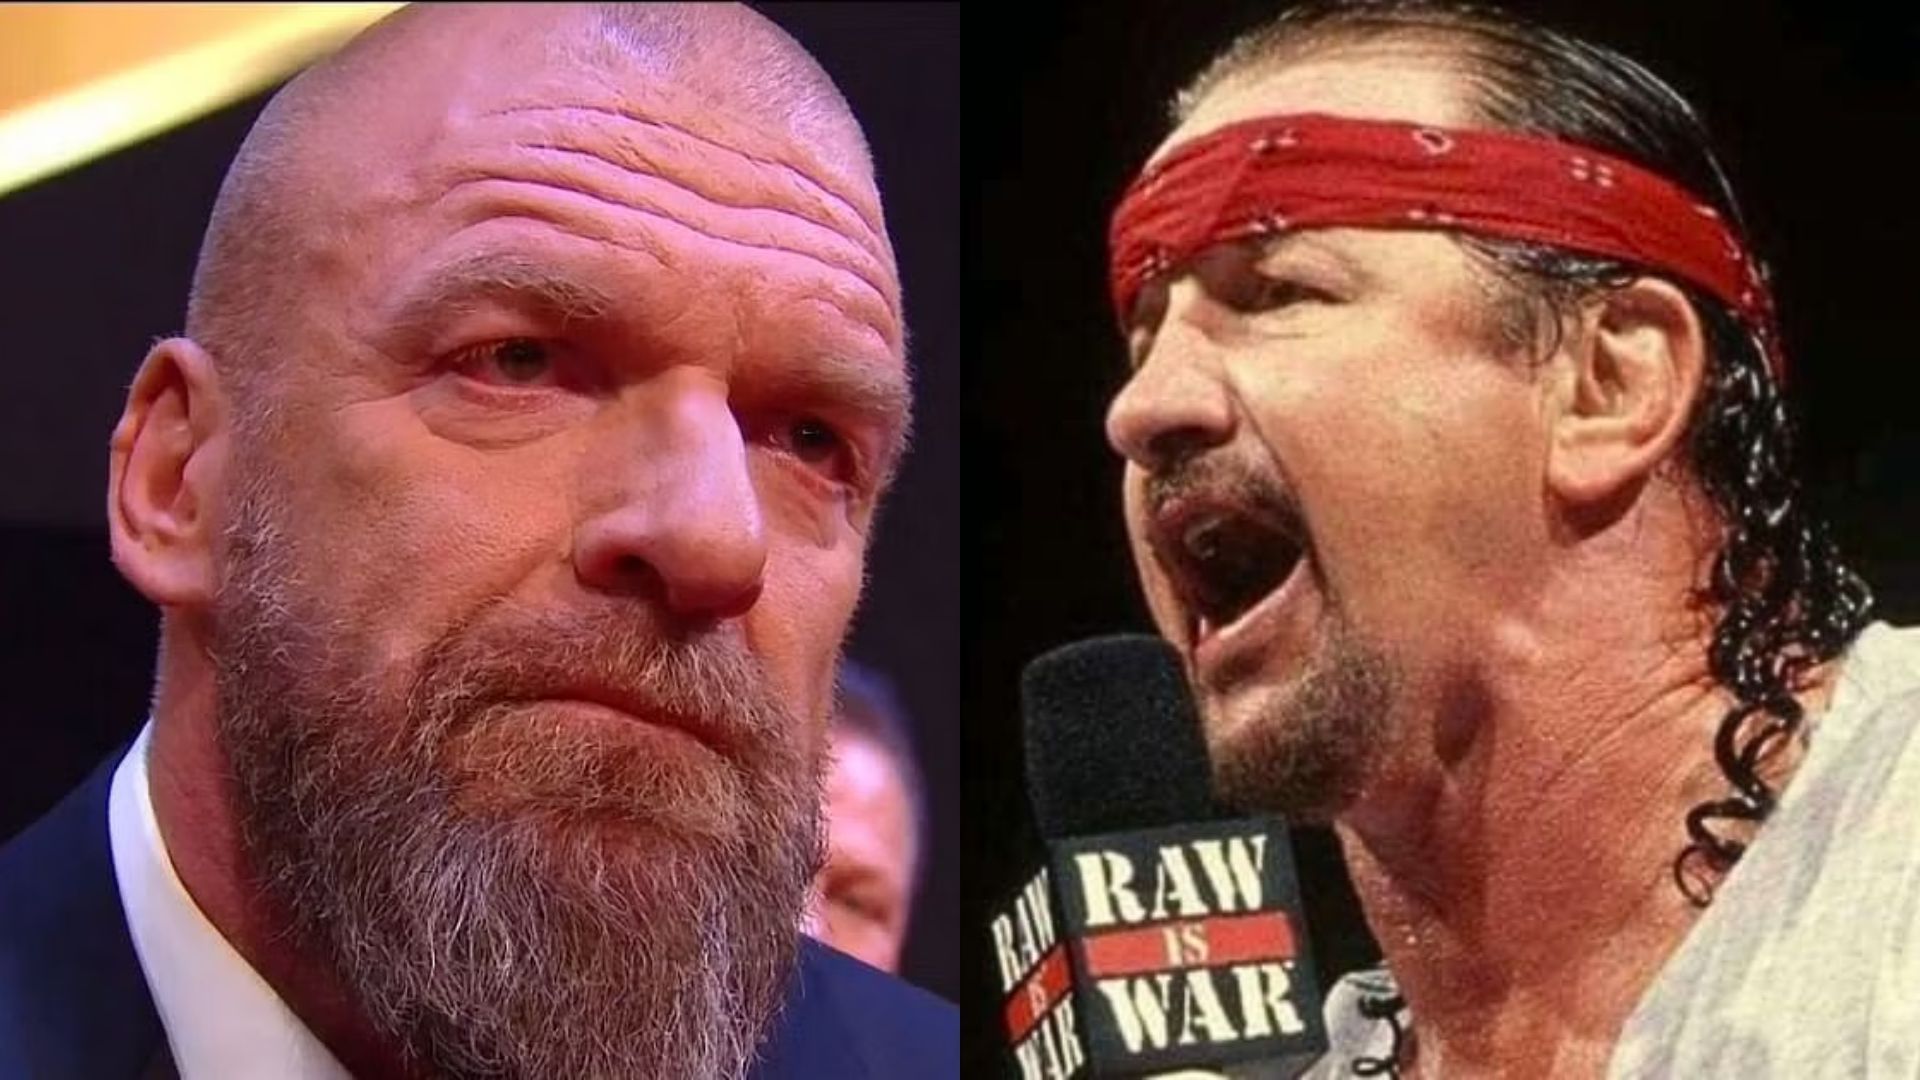 WWE CCO Triple H remembers the late legend Terry Funk